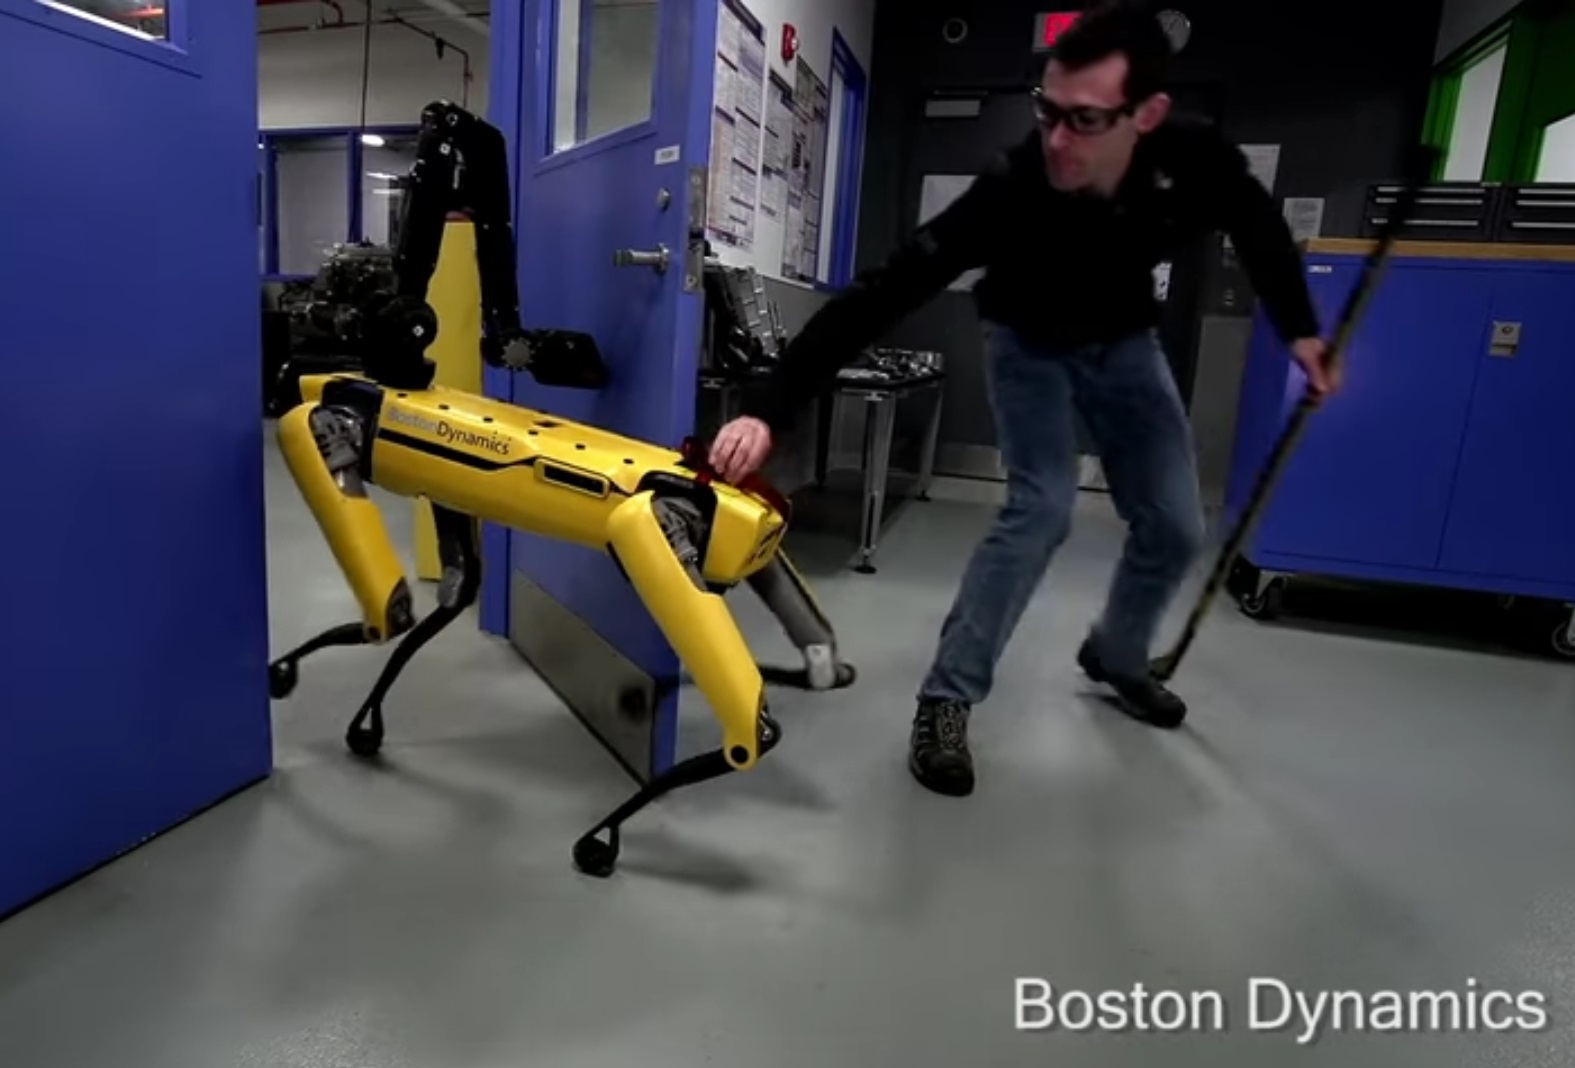 Humans sow seeds of destruction by abusing poor robot just trying to walk through a door